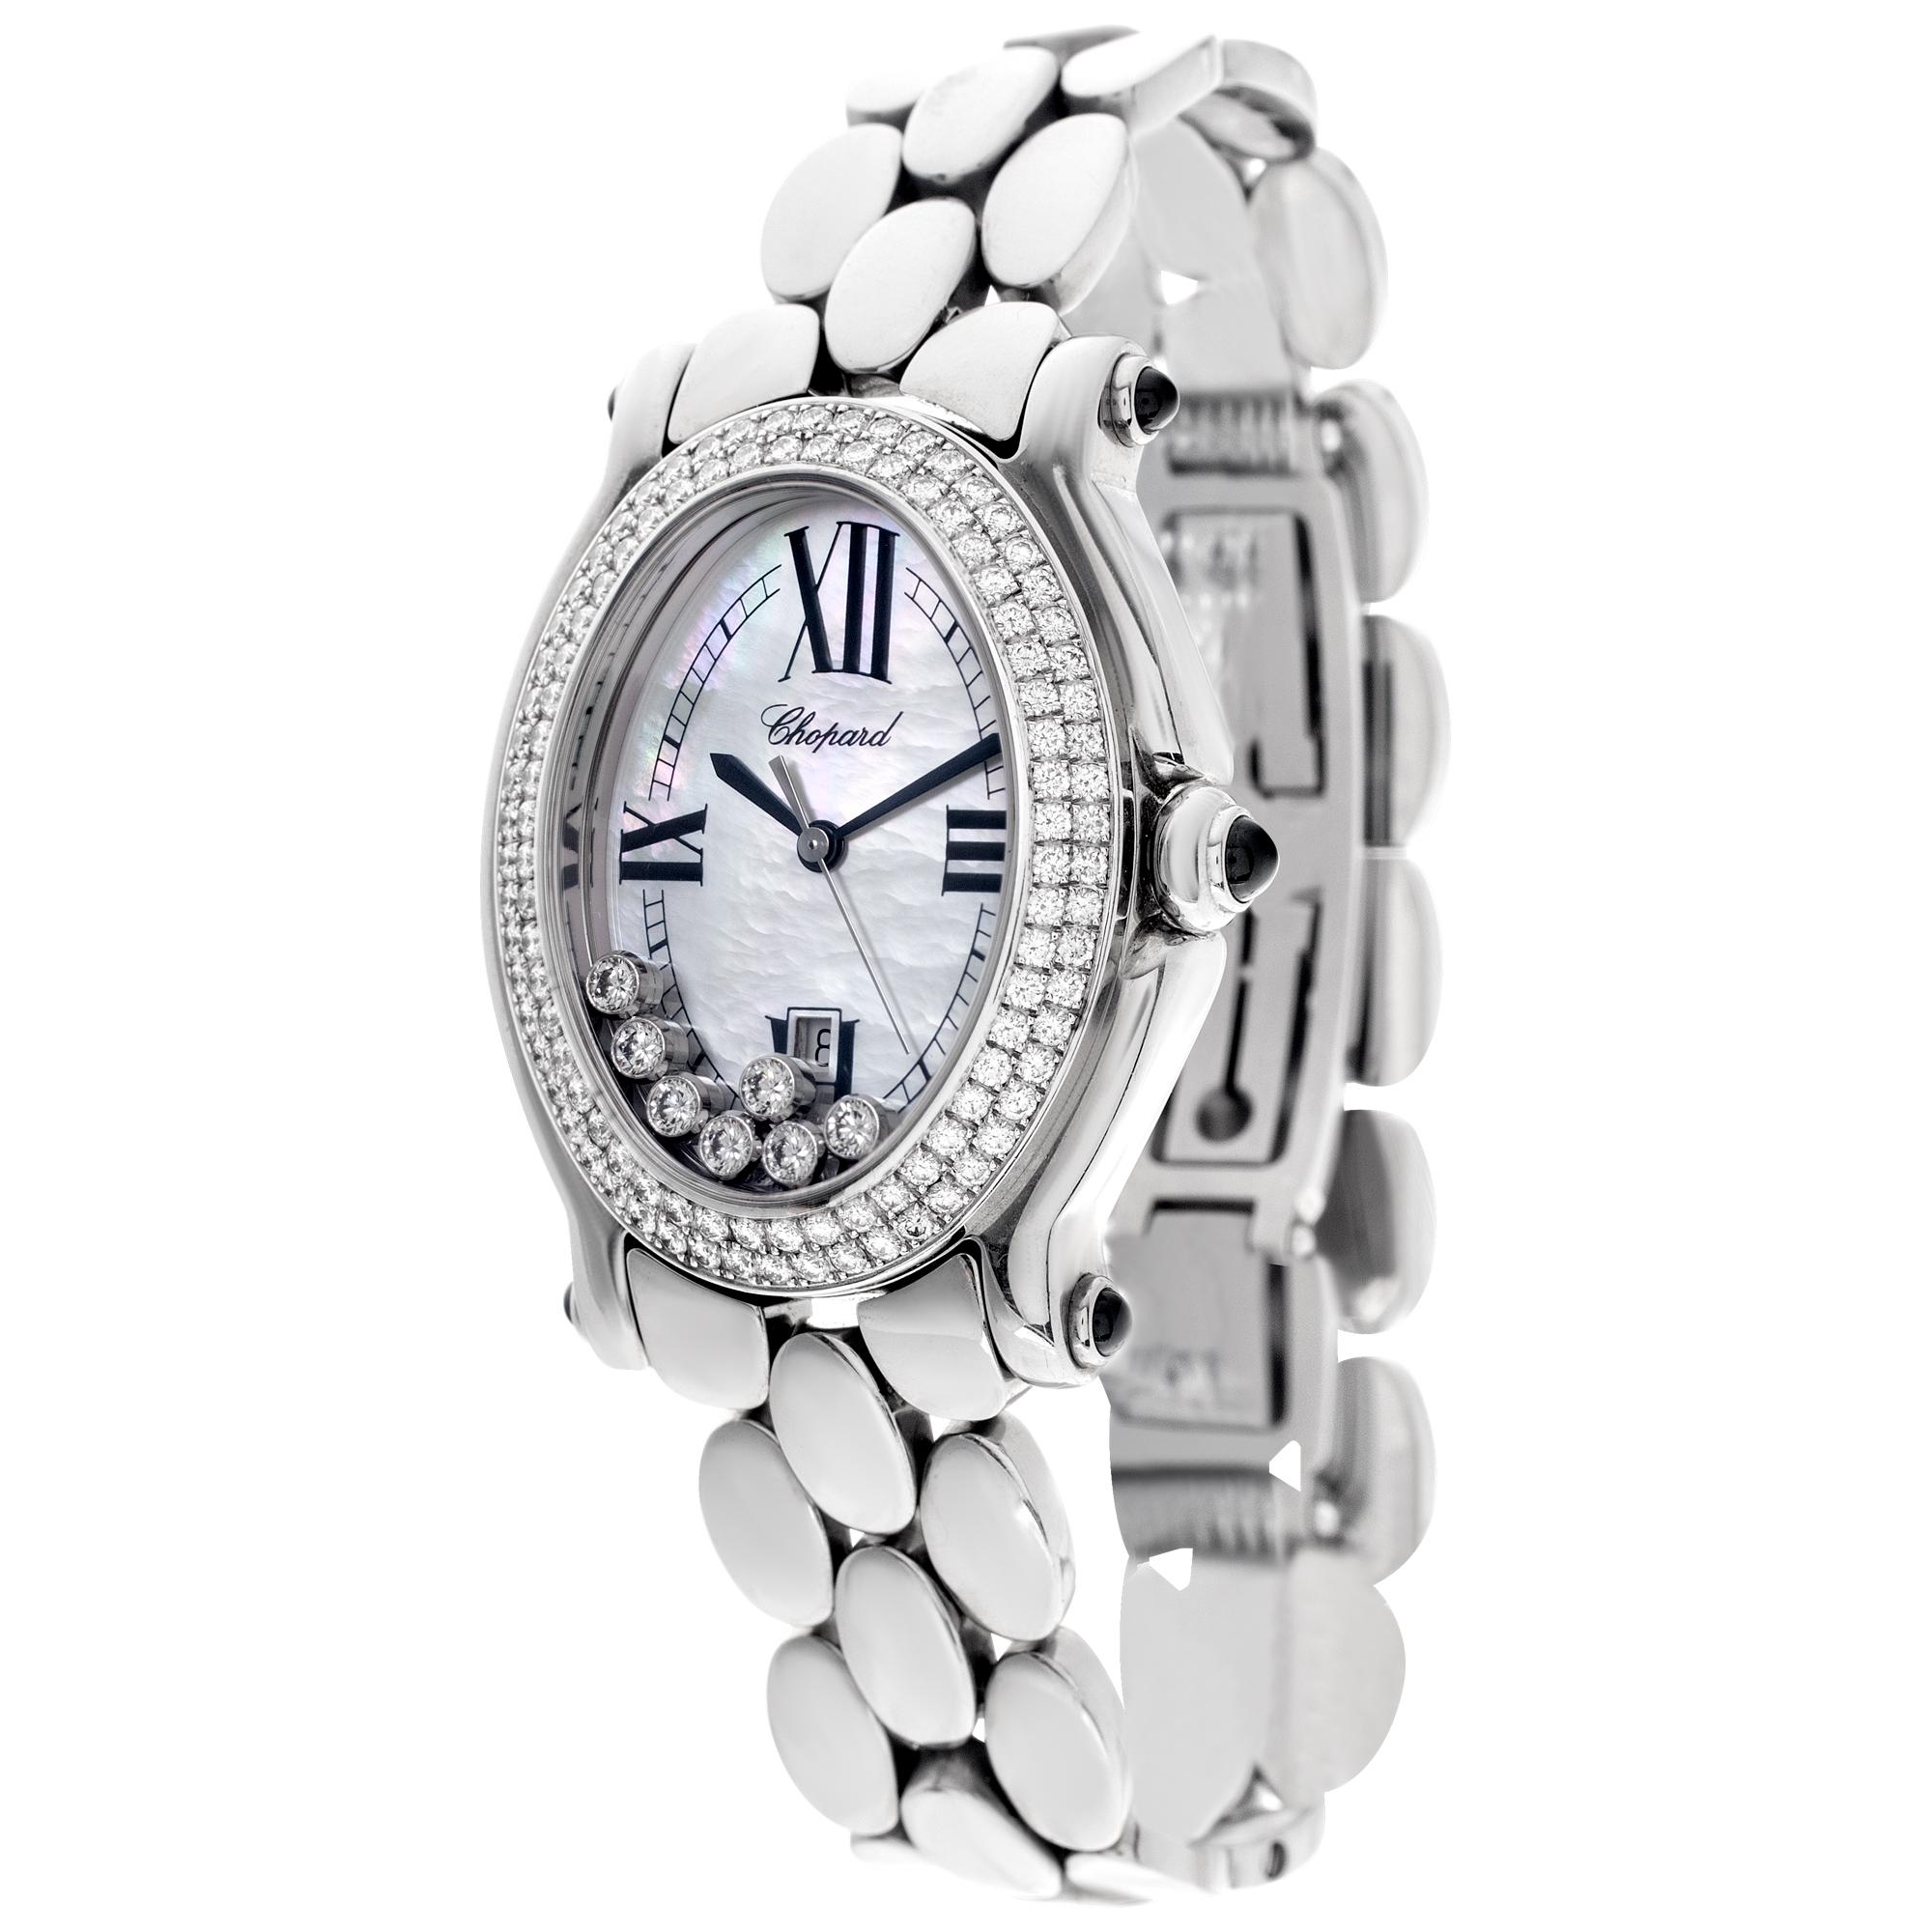 Chopard Happy Sport Oval in stainless steel with 7 floating diamonds, Mother of Pearl dial and double row diamond bezel. Quartz. Ref 27/8953-23. Fine Pre-owned Chopard Watch.

Certified preowned Dress Chopard Happy Sport 27/8953-23 watch is made out